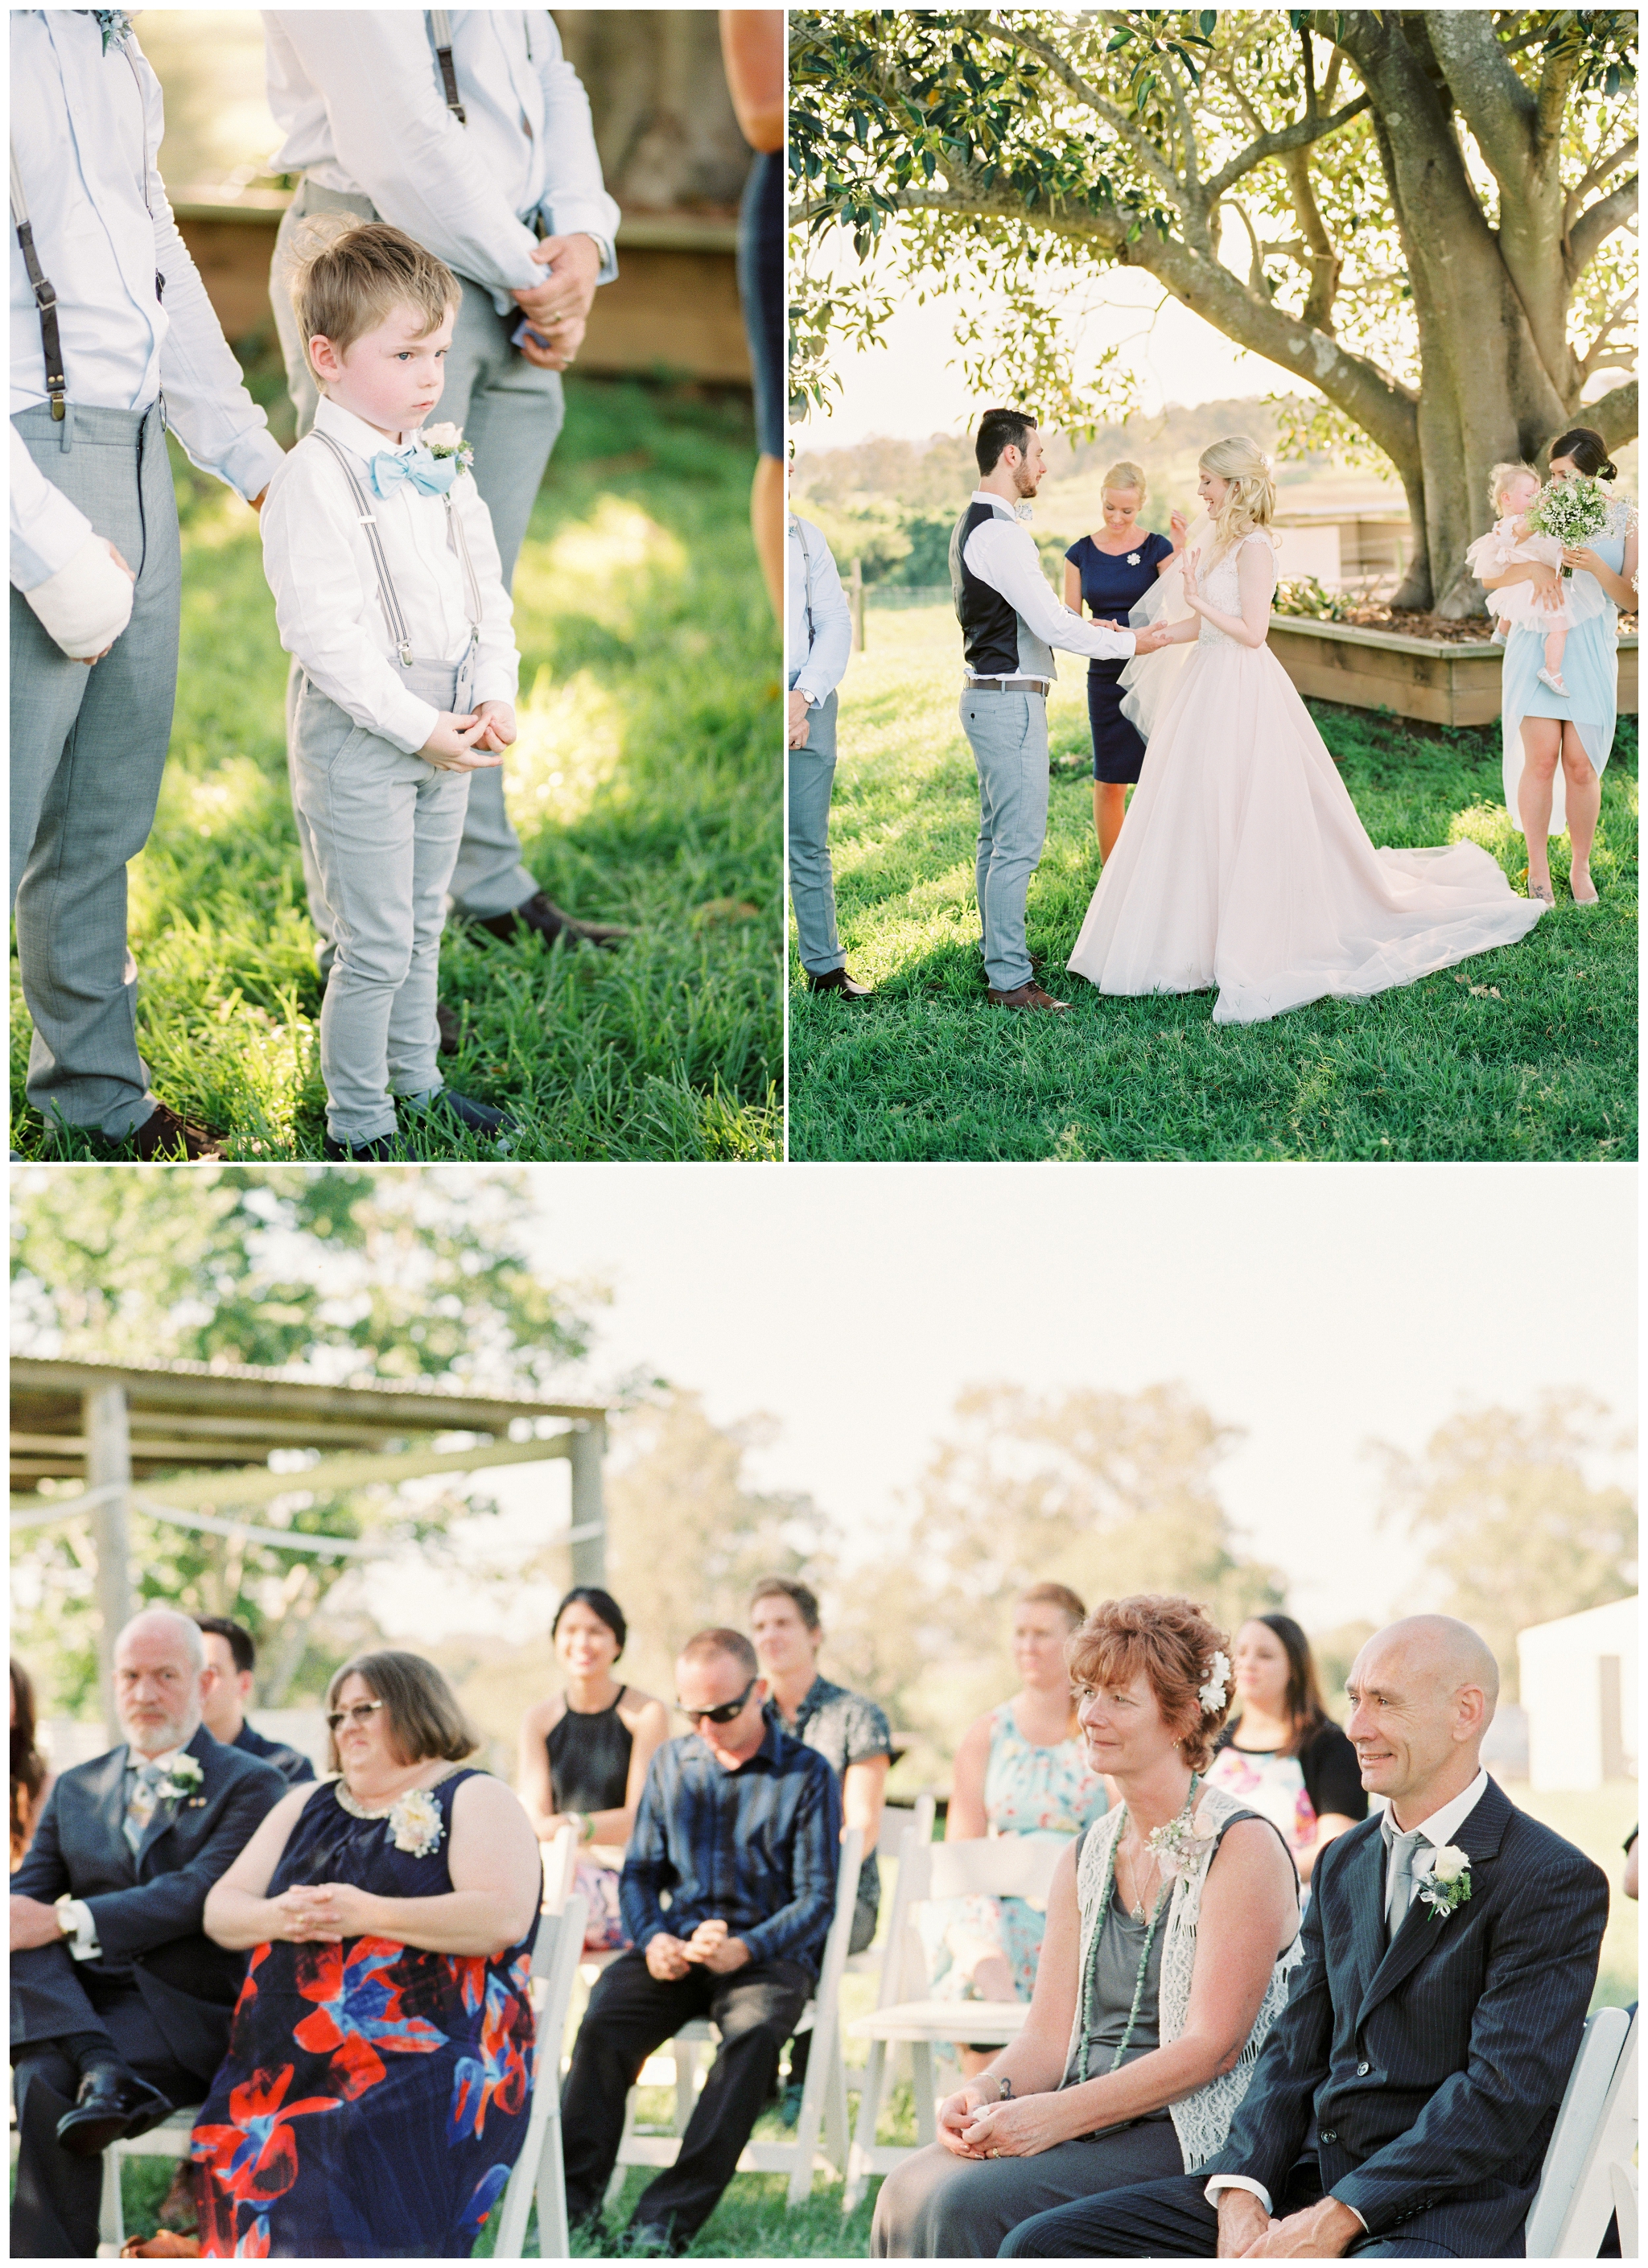 Tegan and Alex Wedding at Albert River Wines by Casey Jane Photography 41